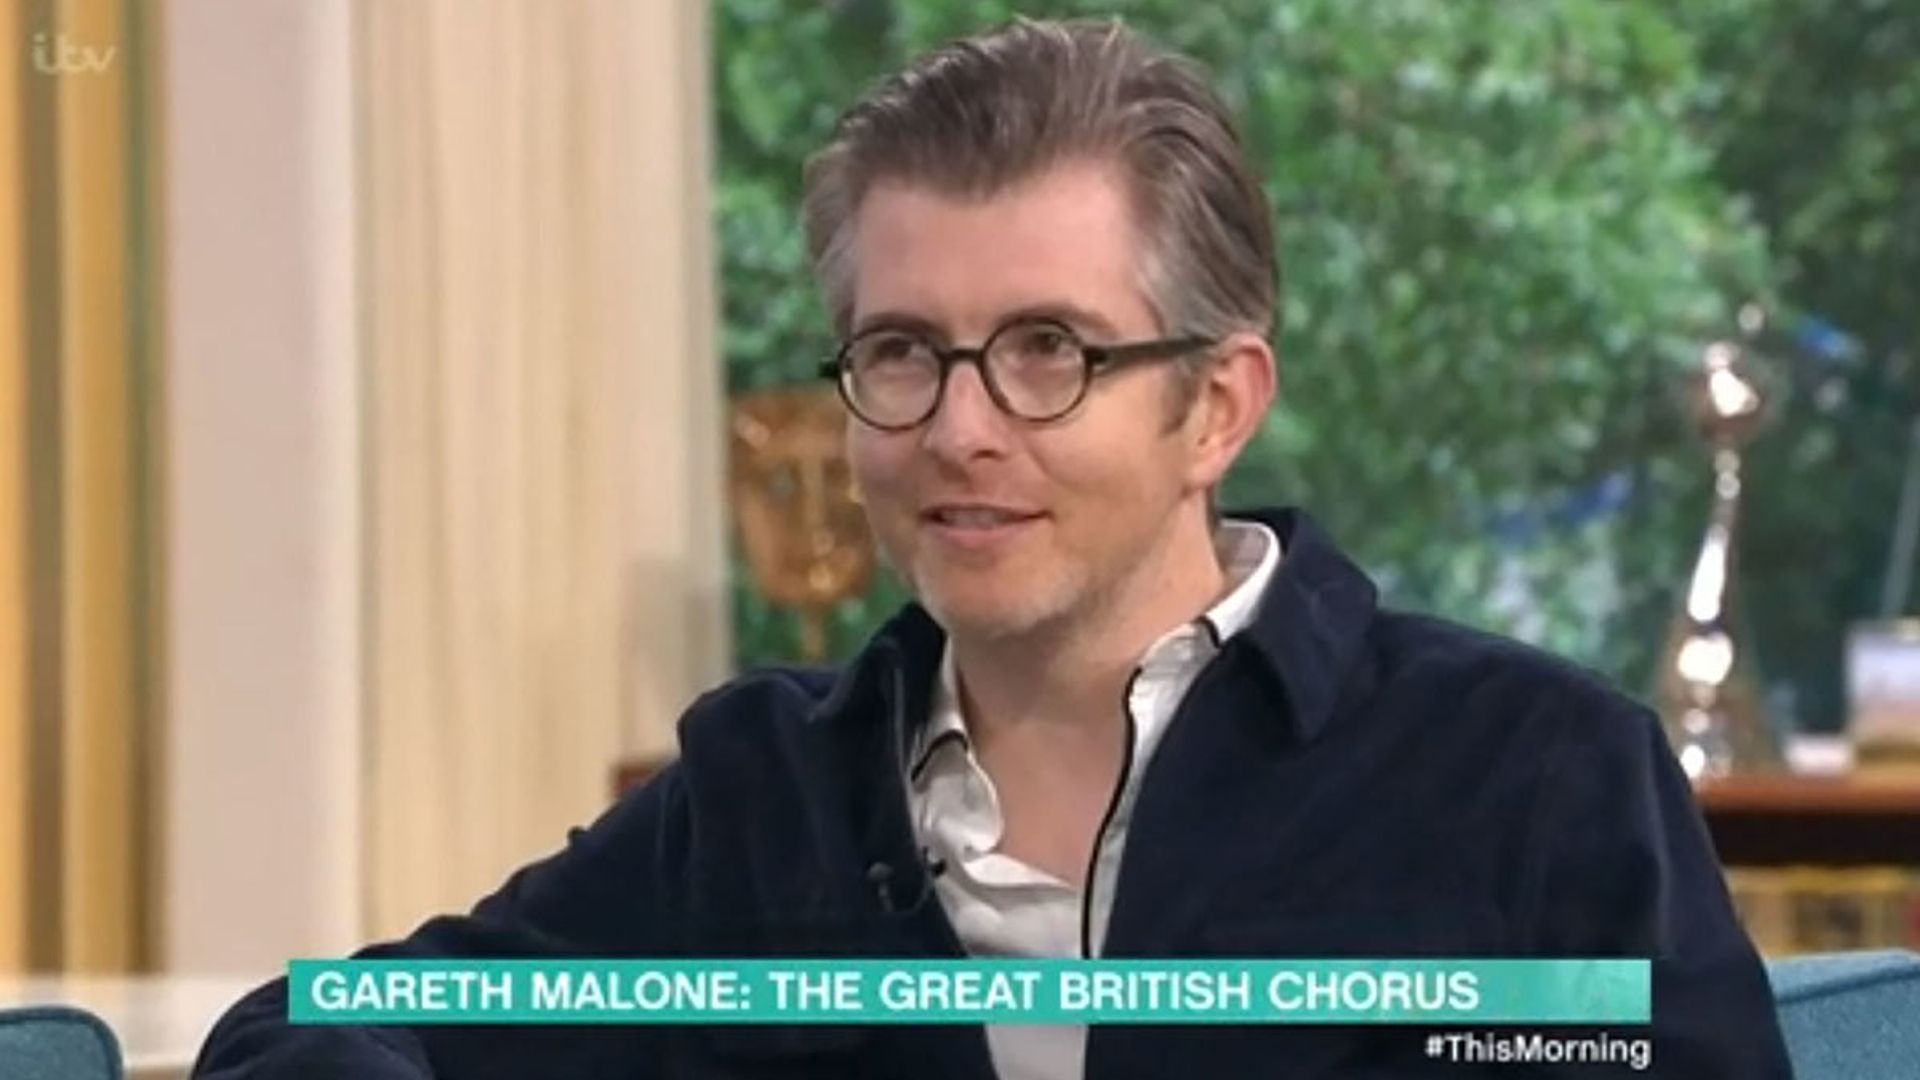 Gareth Malone brings kindness to the world with a huge announcement - and he's now trending on Twitter